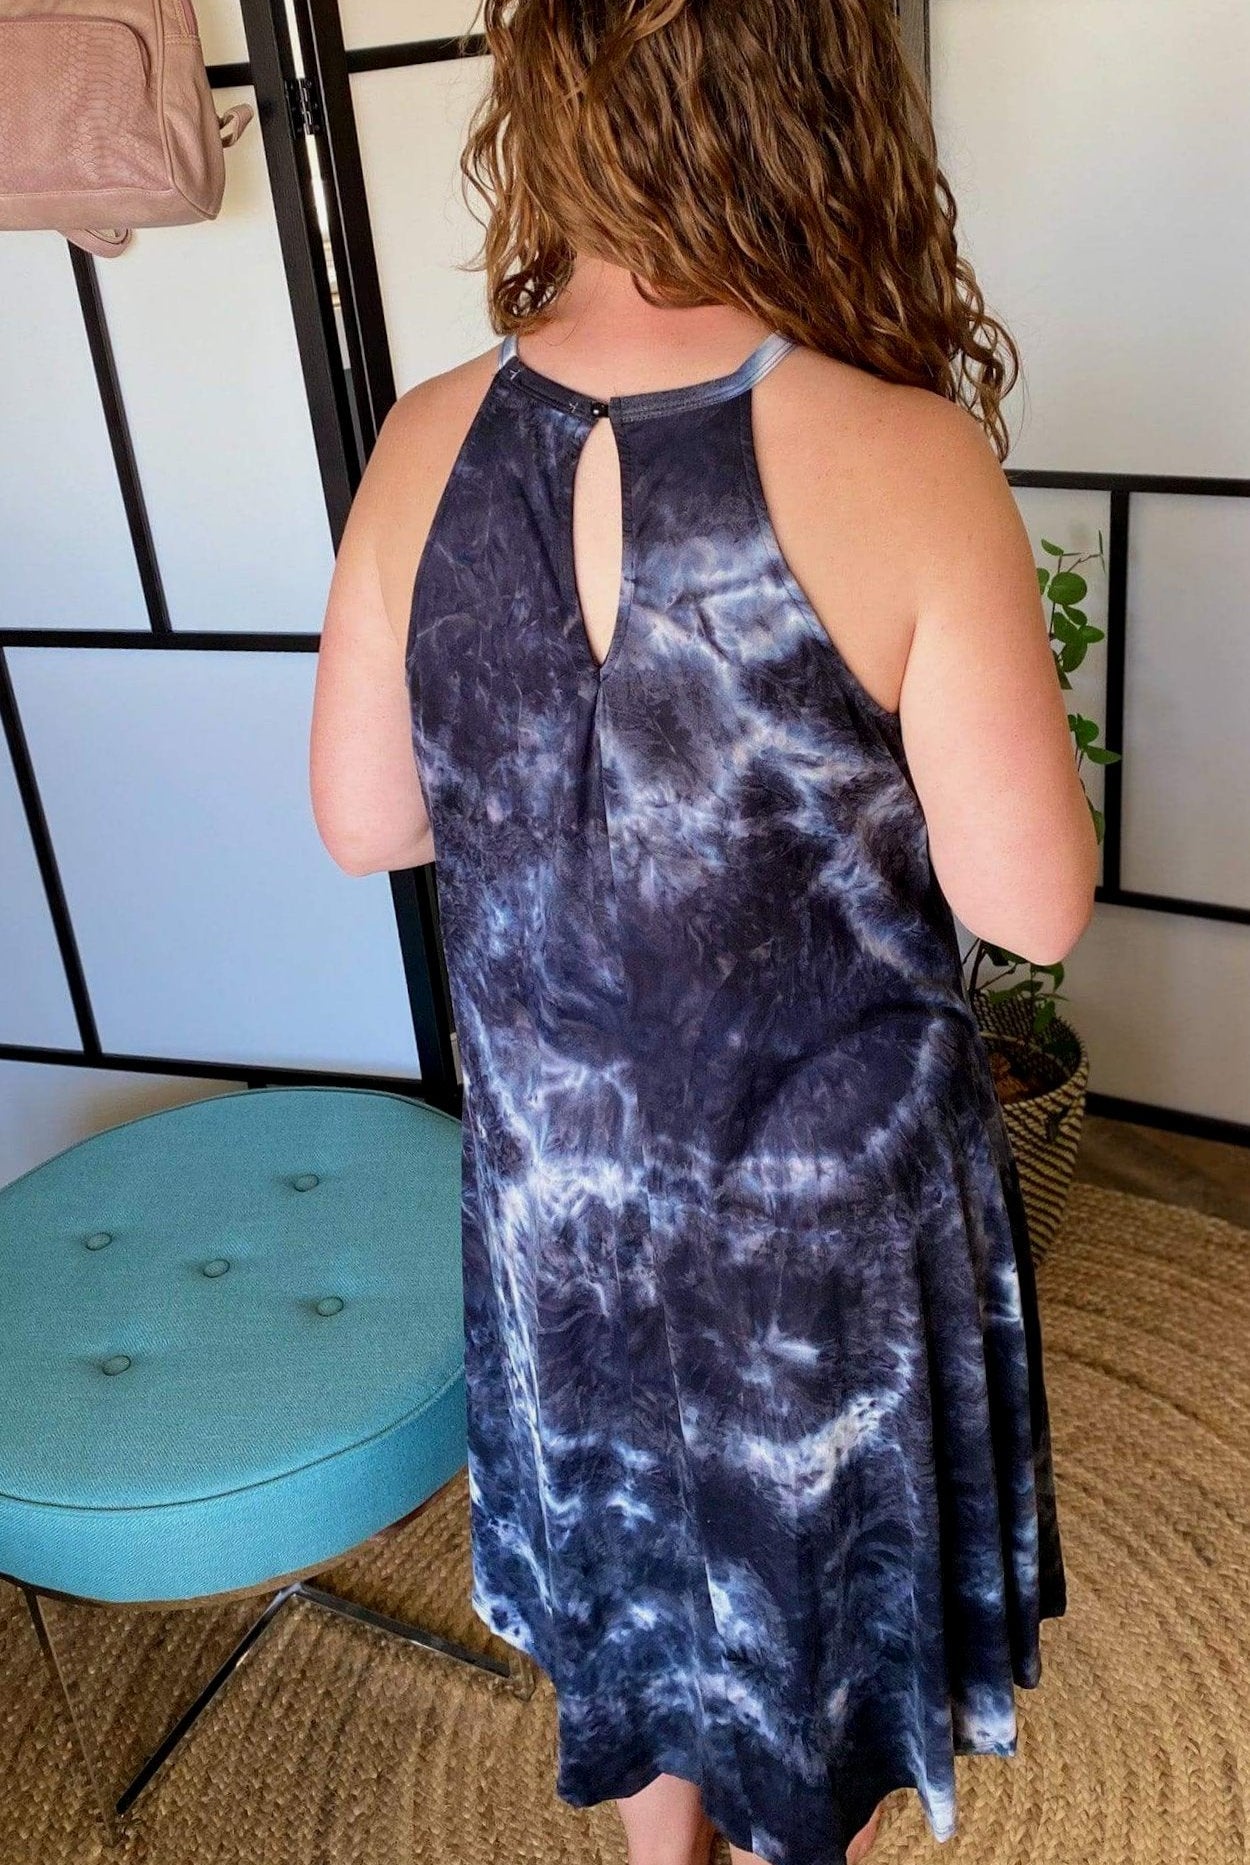 *Final Sale* Starry Night Dress *Small - Large - XL* - Bunky & Marie's Boutique